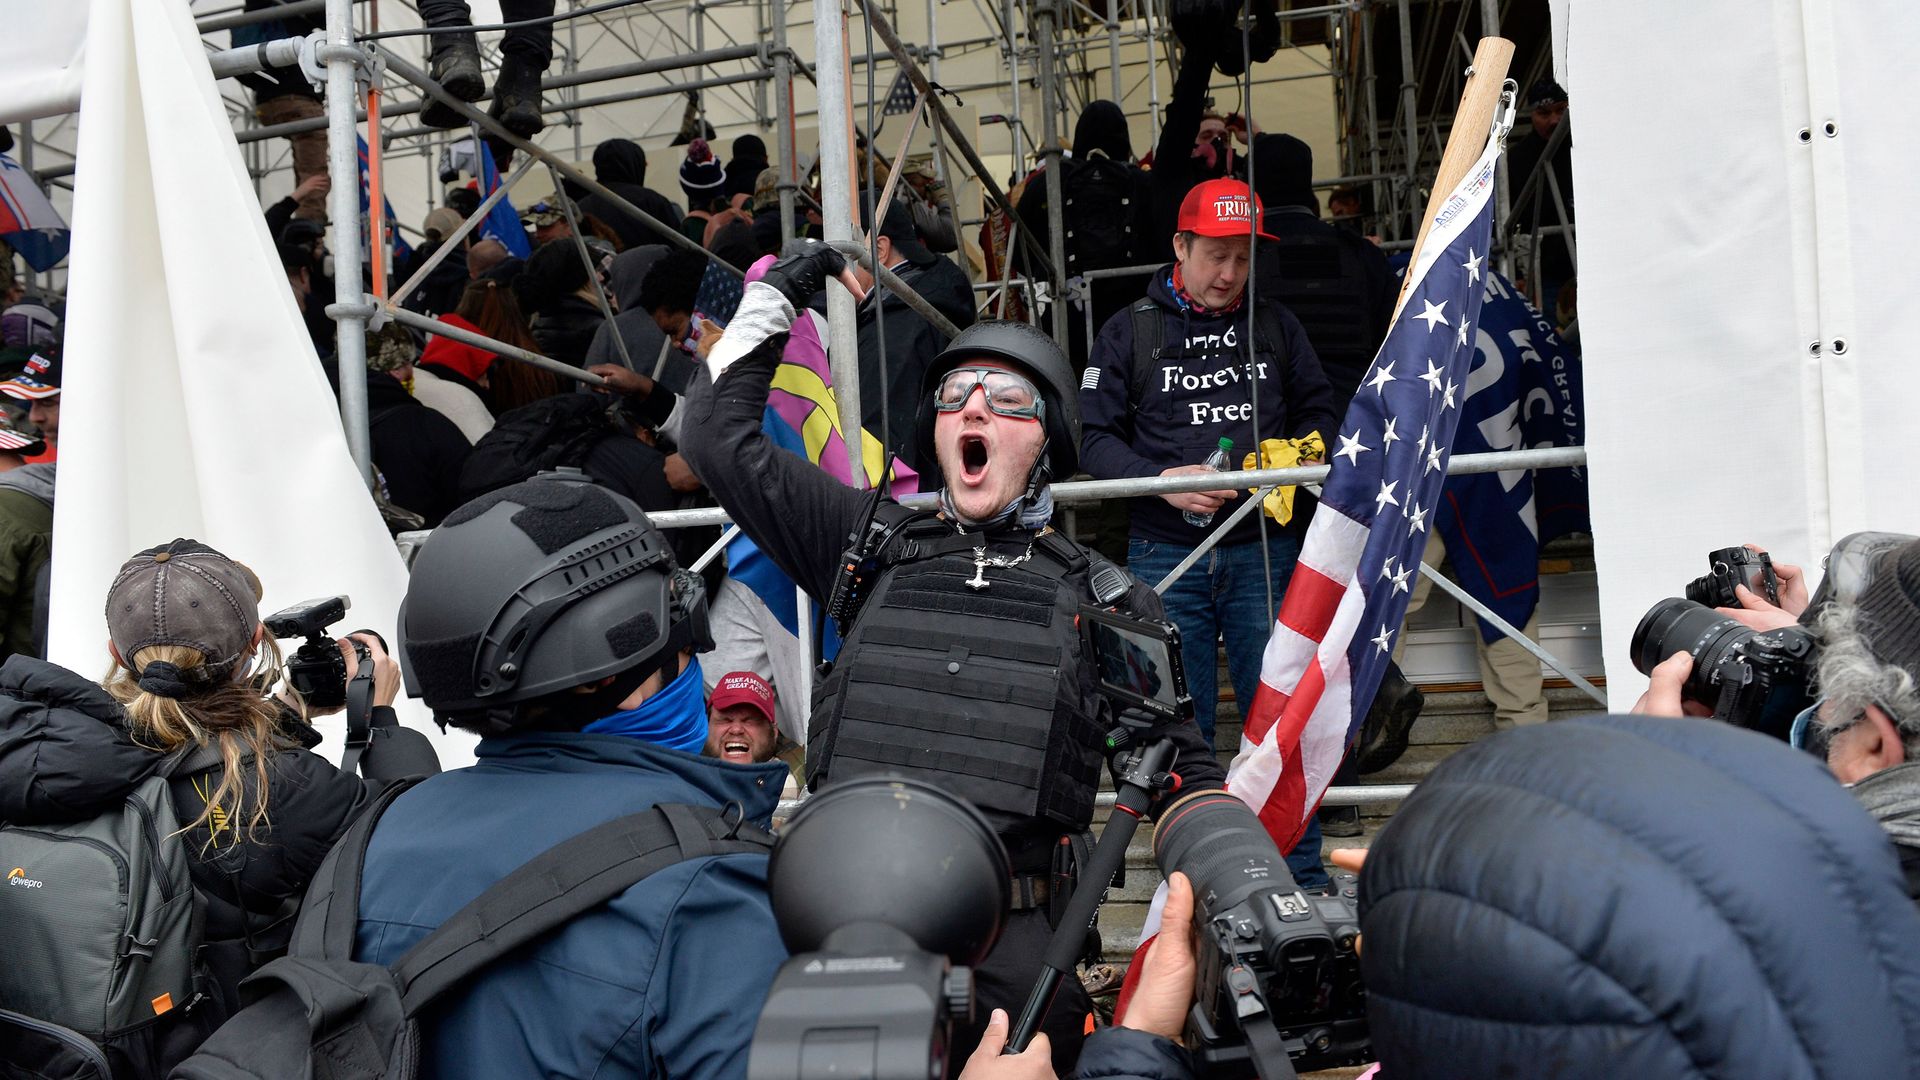 A man calls on people to raid the building as Trump supporters clash with police and security forces as they try to storm the US Capitol